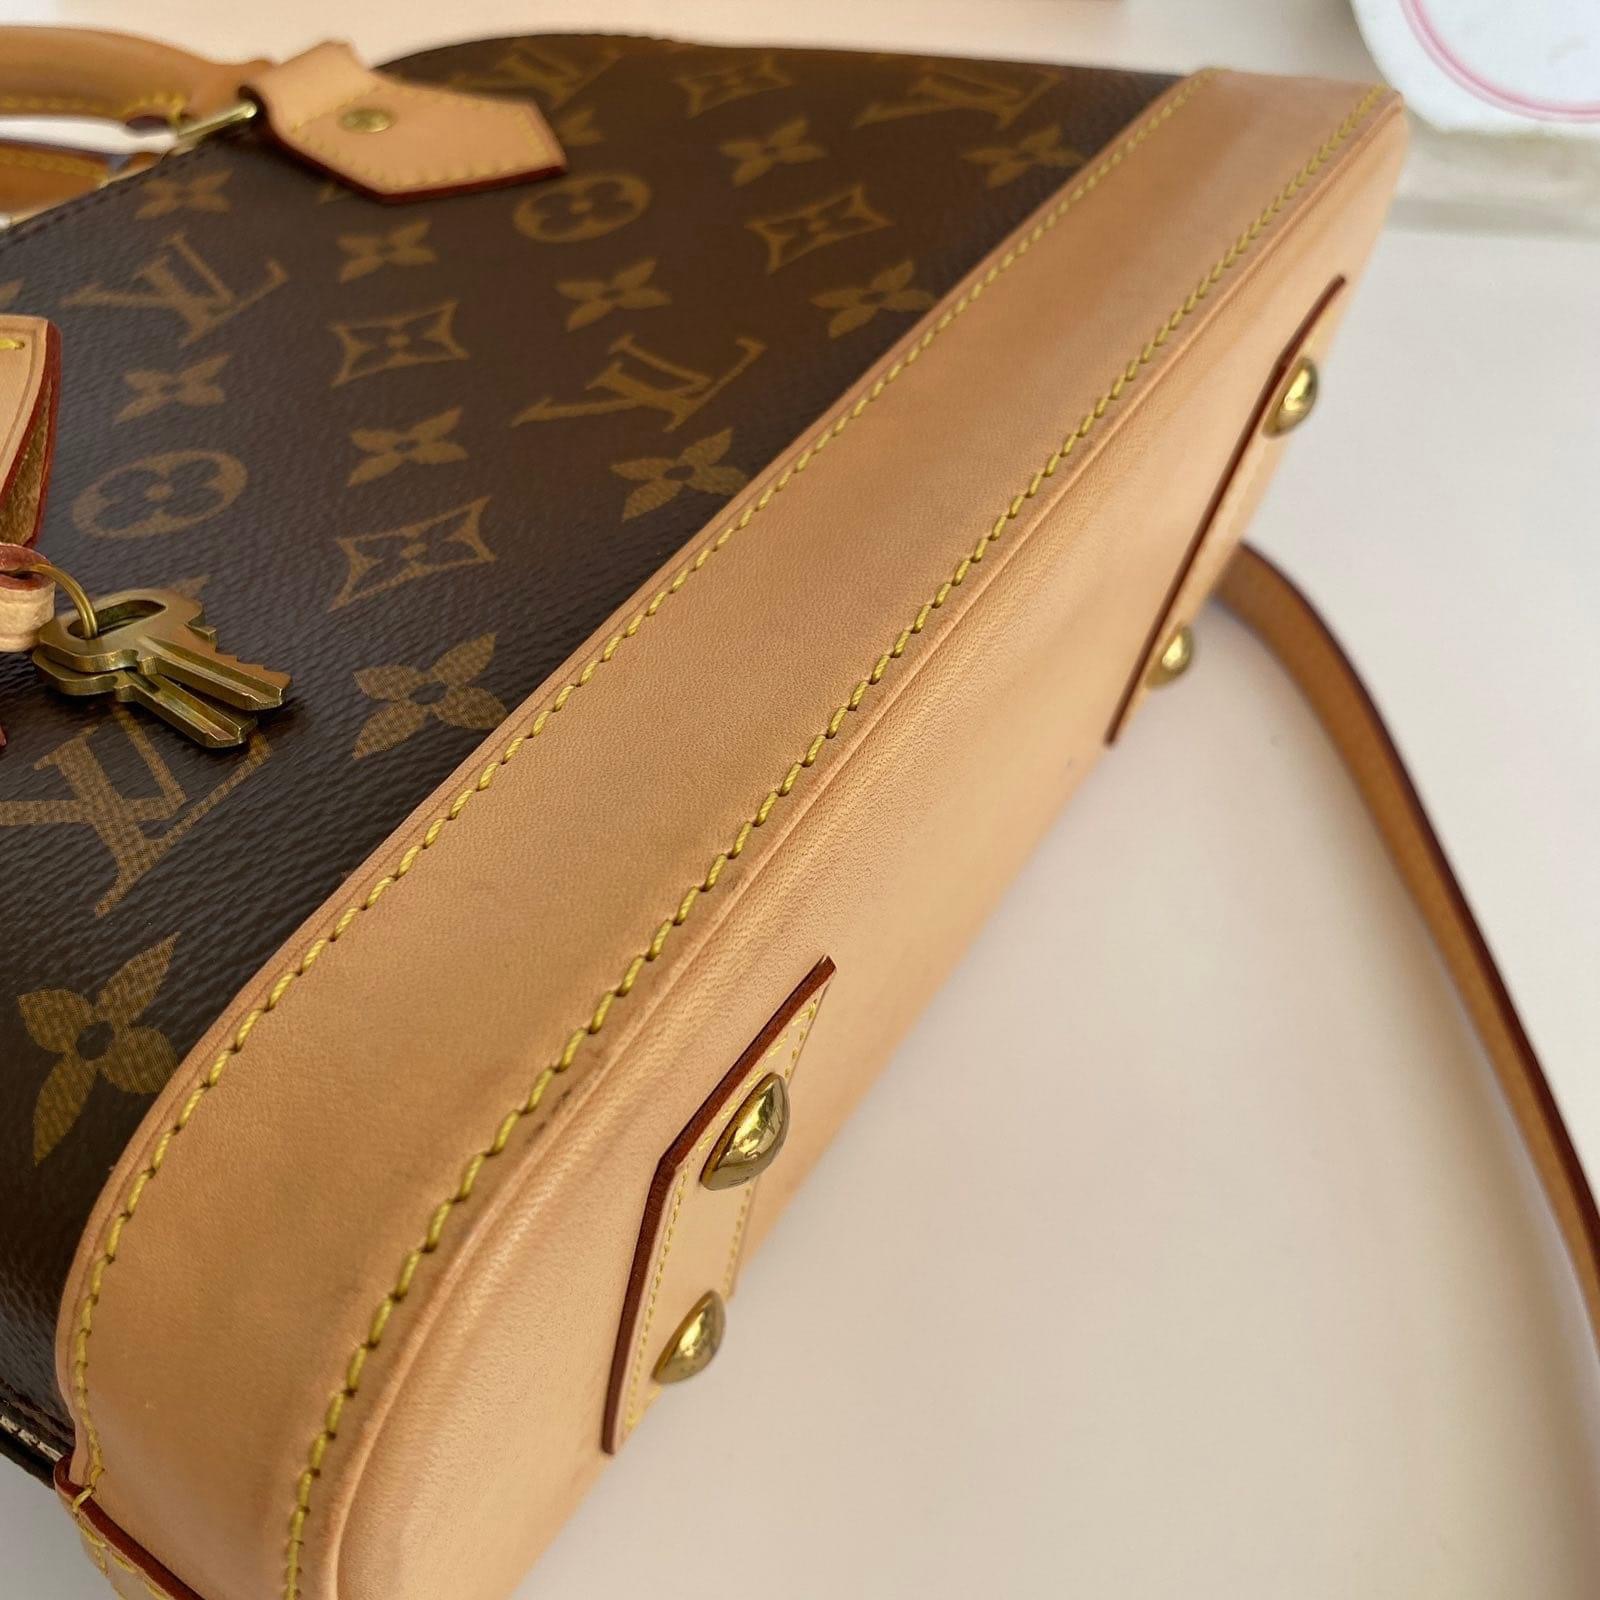 Feeling crazy but I cannot find a date code on my new Alma bb : r/ Louisvuitton